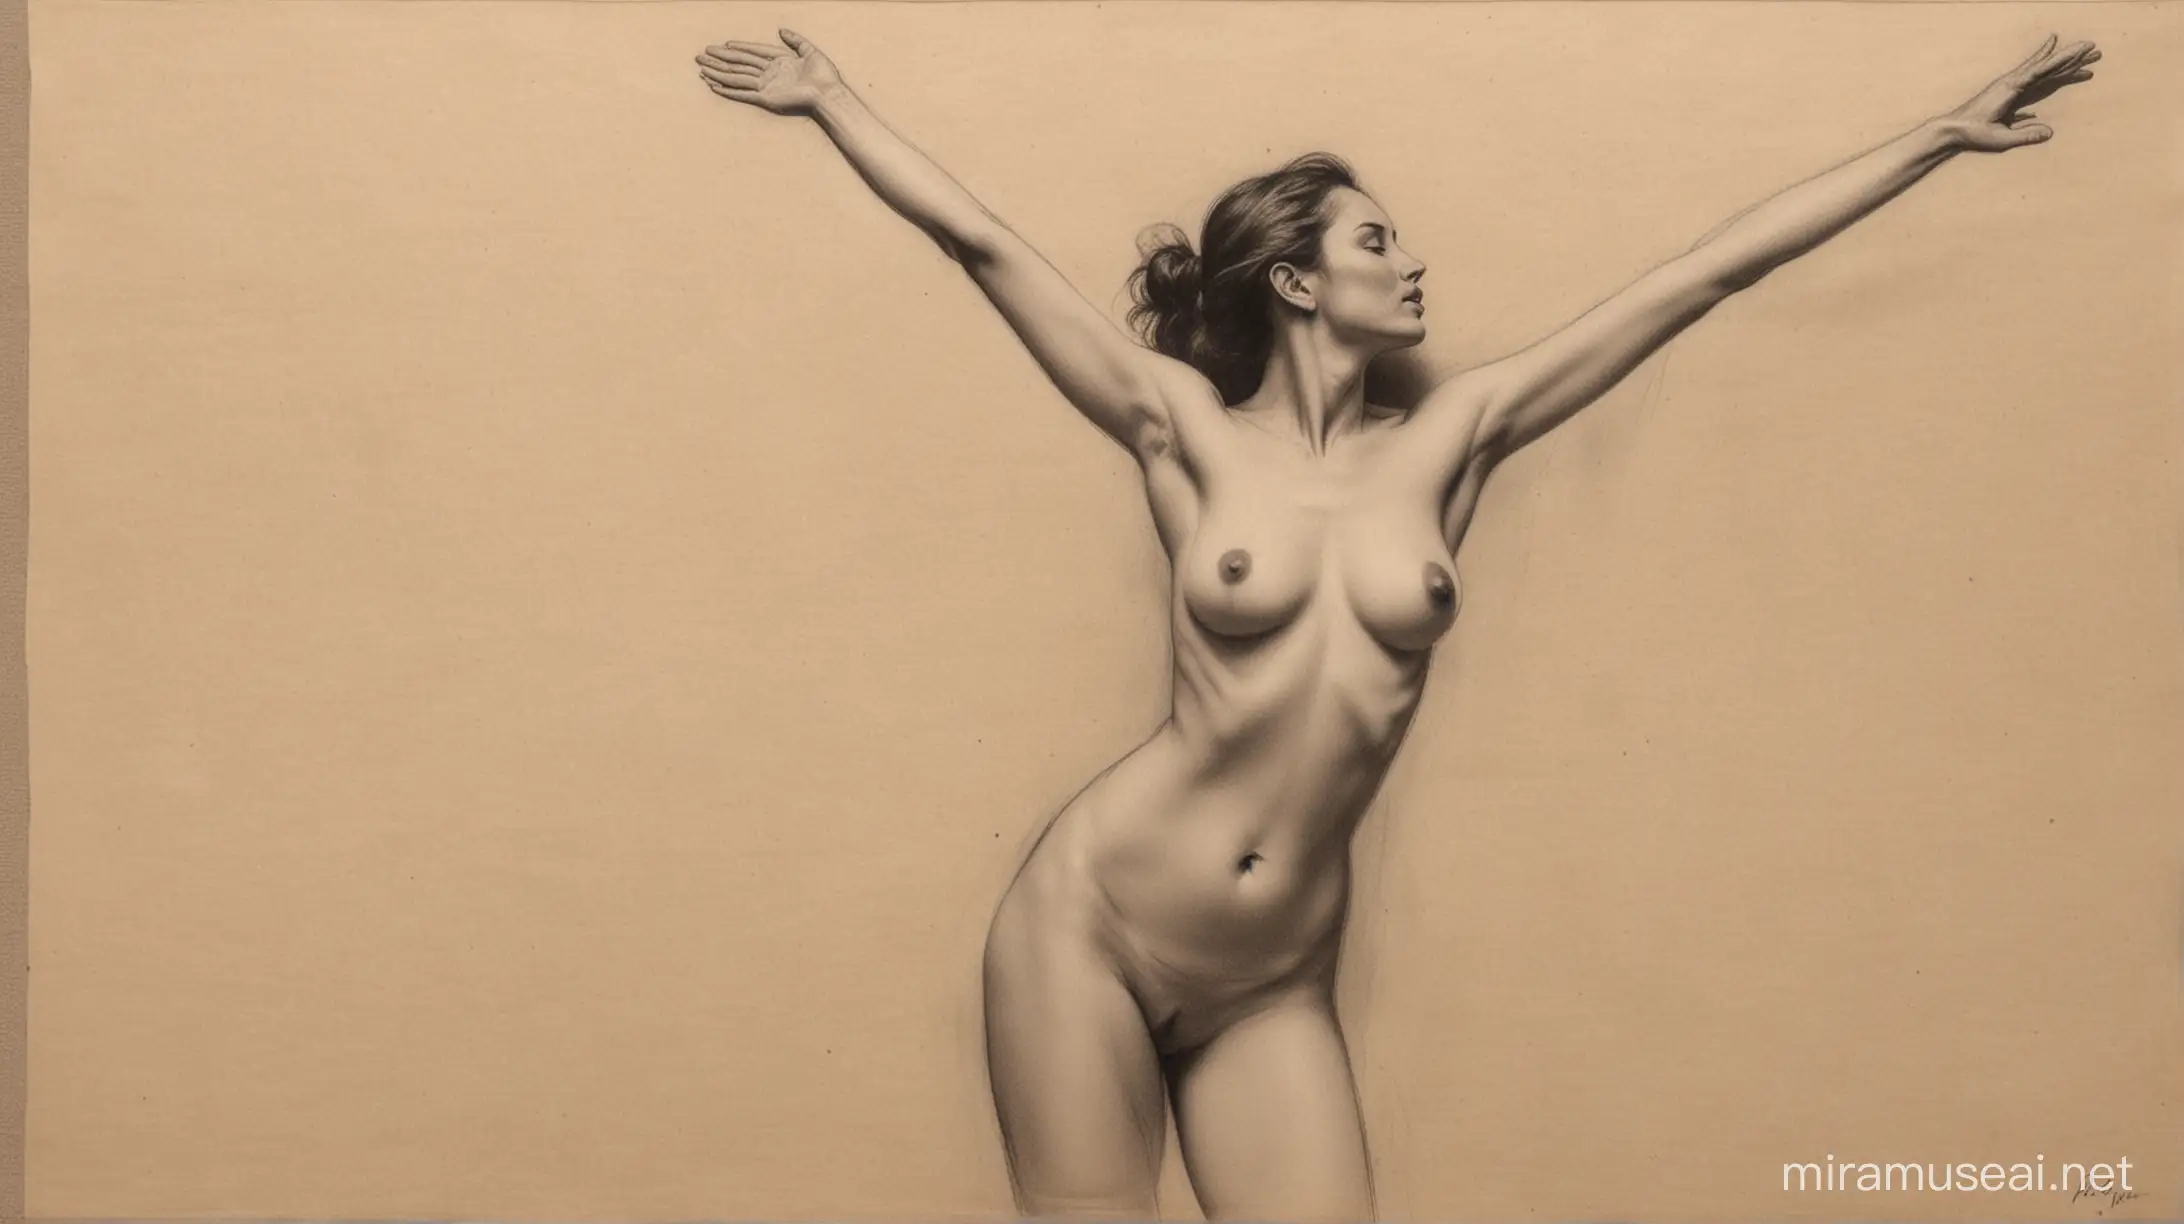 Art study of nude woman, arms up, style Philippe Flohic, charcoal on old paper